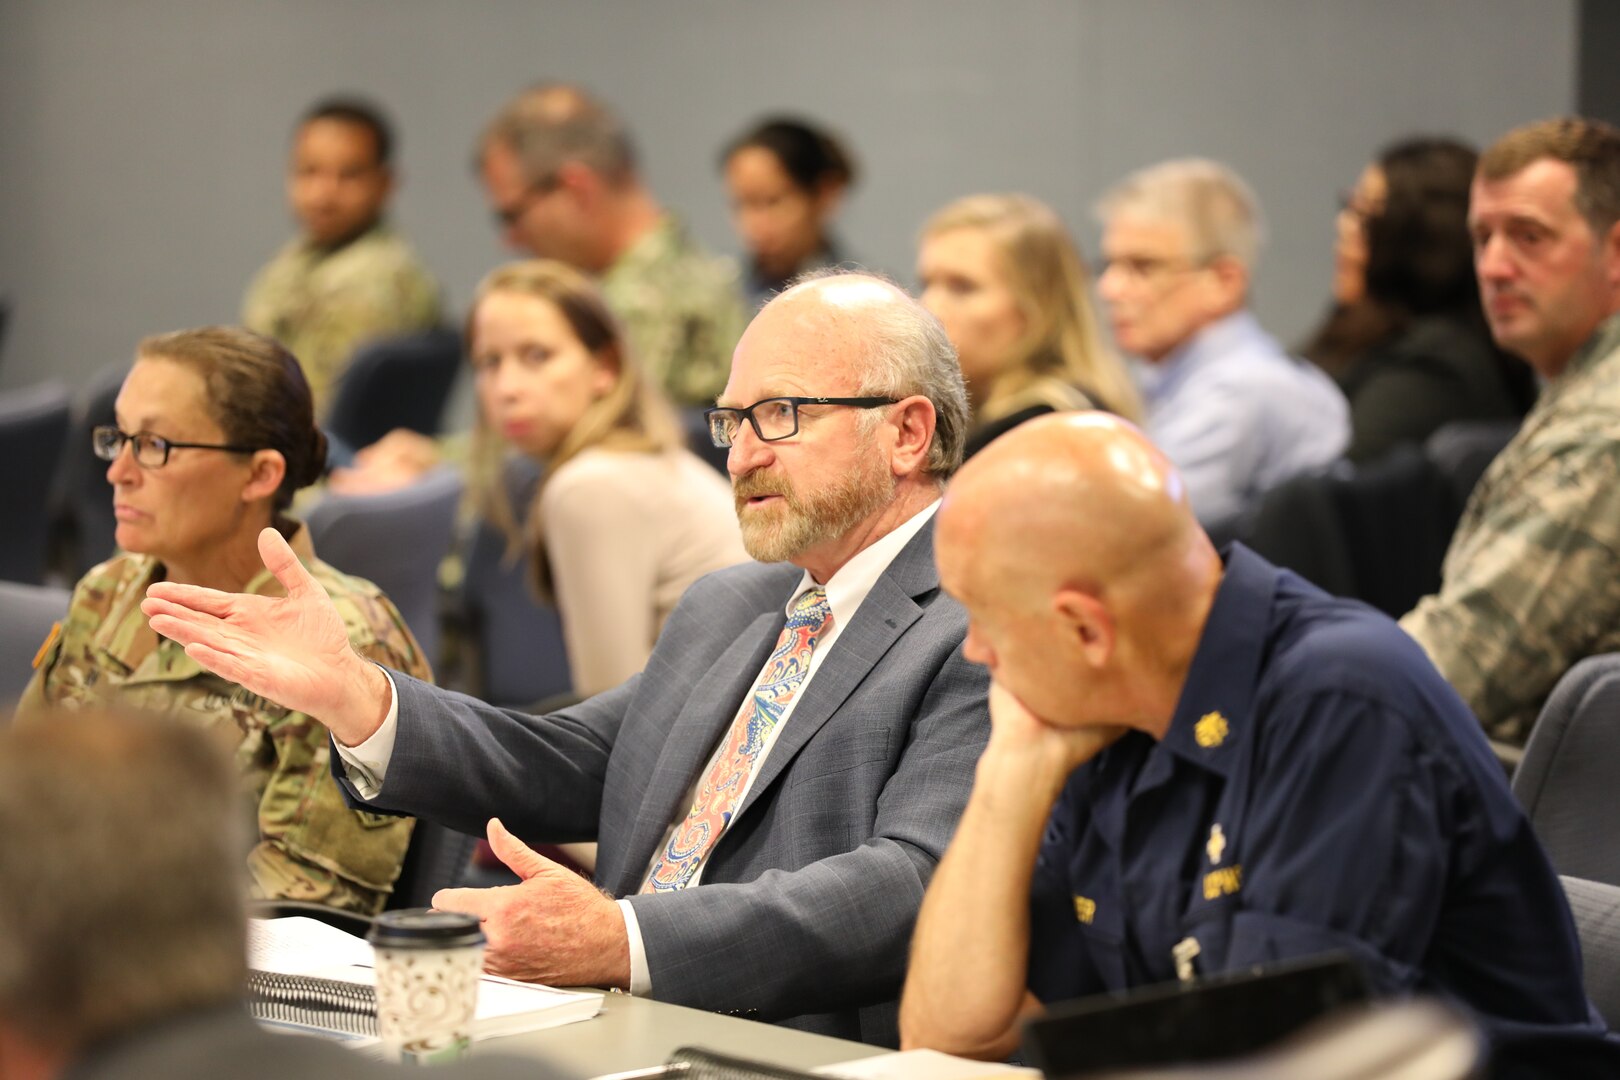 On June 25-26, 2019, Joint Task Force Civil Support (JTF-CS), hosted exercise Vista Proximity II (VP II) at Joint Base Langley-Eustis. VP II is a tabletop exercise created by United States Northern Command (USNORTHCOM) that brings together national, regional and local partners to evaluate the combined large-scale response for a biological incident within the continental US. 
The exercise was an opportunity to create a bridge for smooth planning between agencies that will partner together in the event of a public health emergency.